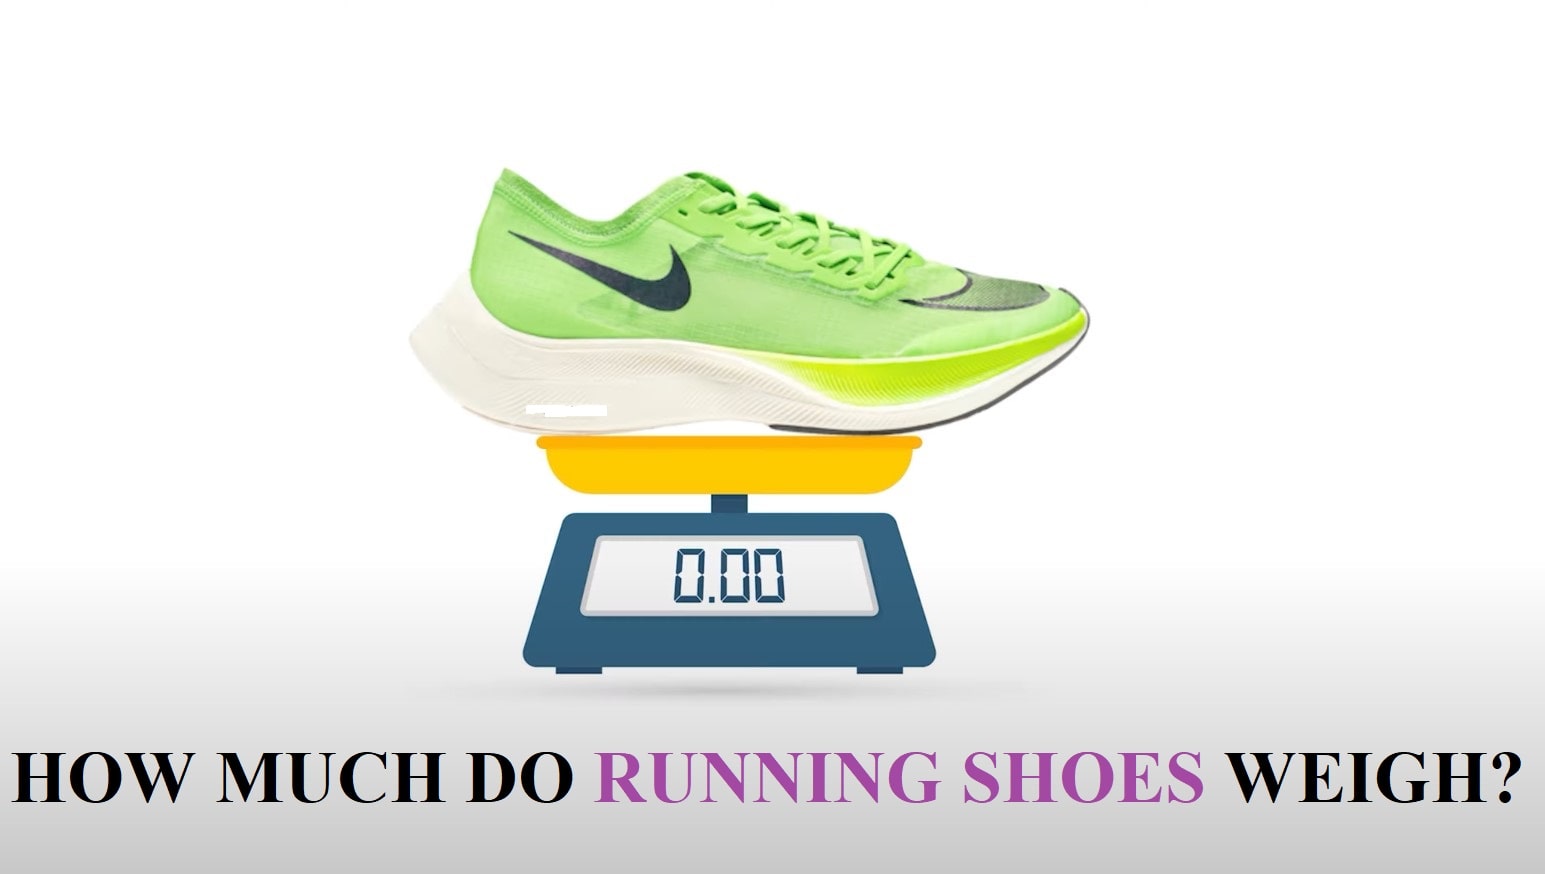 HOW MUCH DO RUNNING SHOES WEIGH